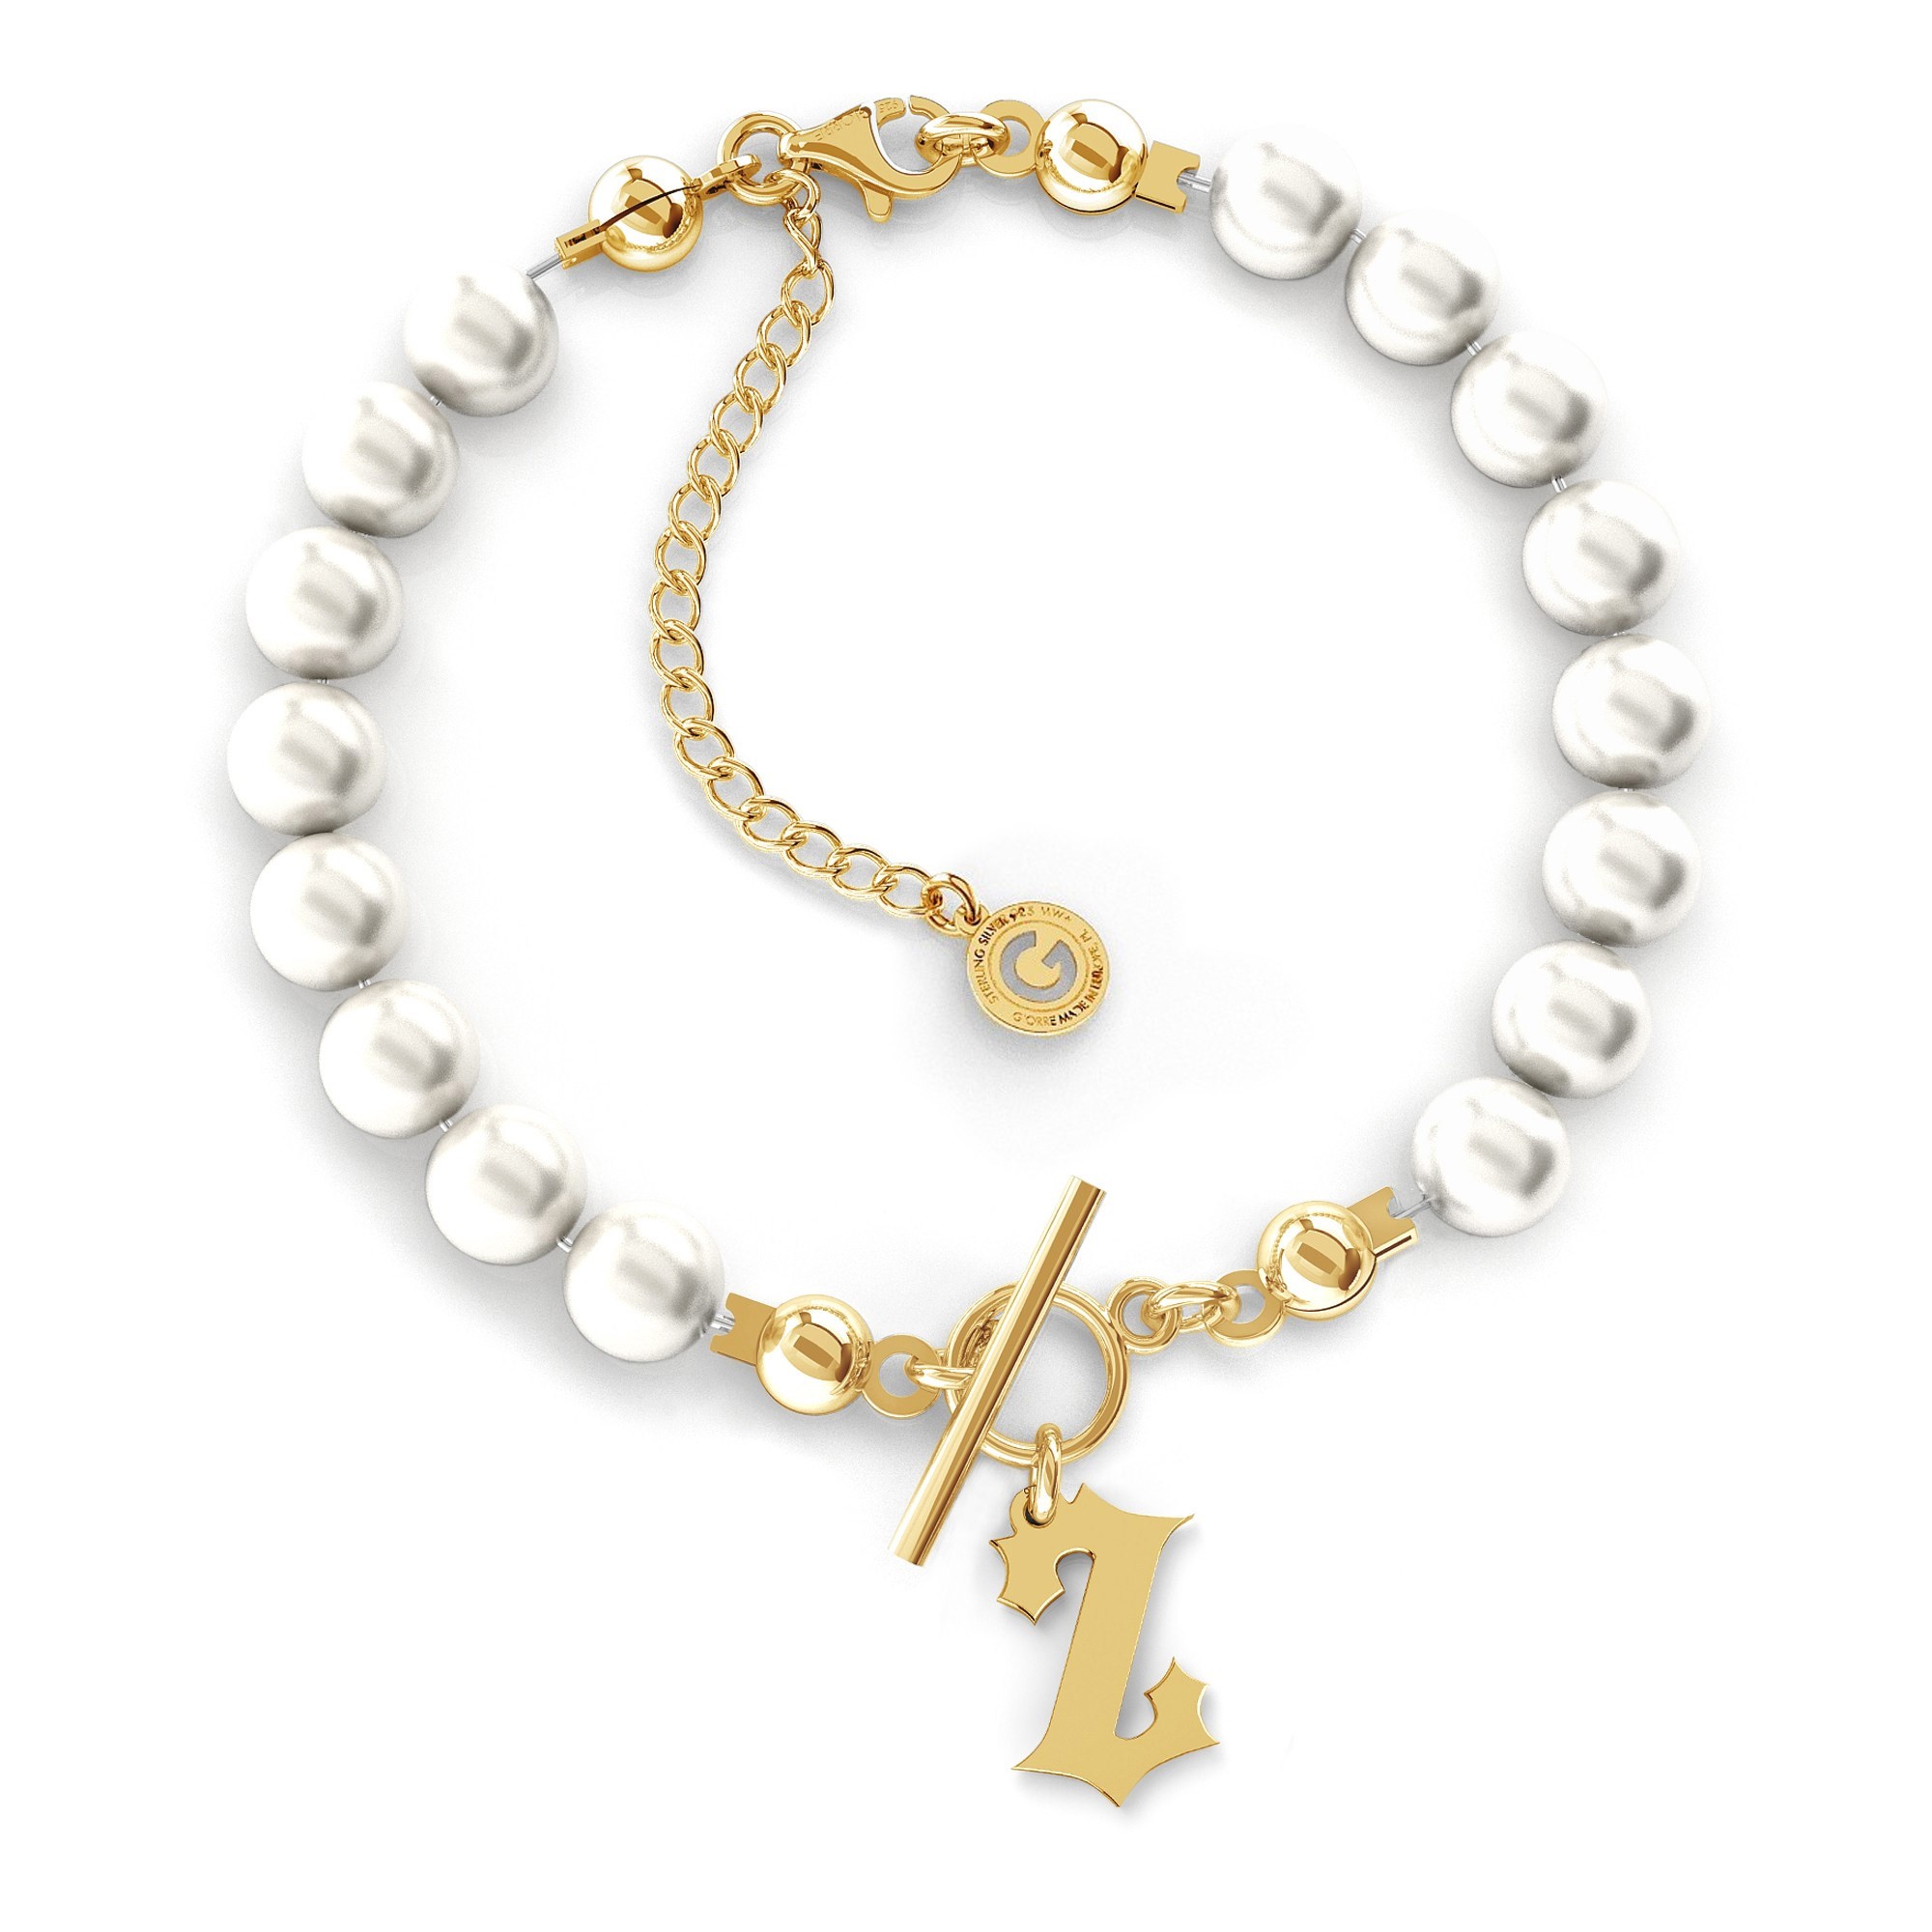 Pearls bracelet with your letter MON DÉF, Silver 925